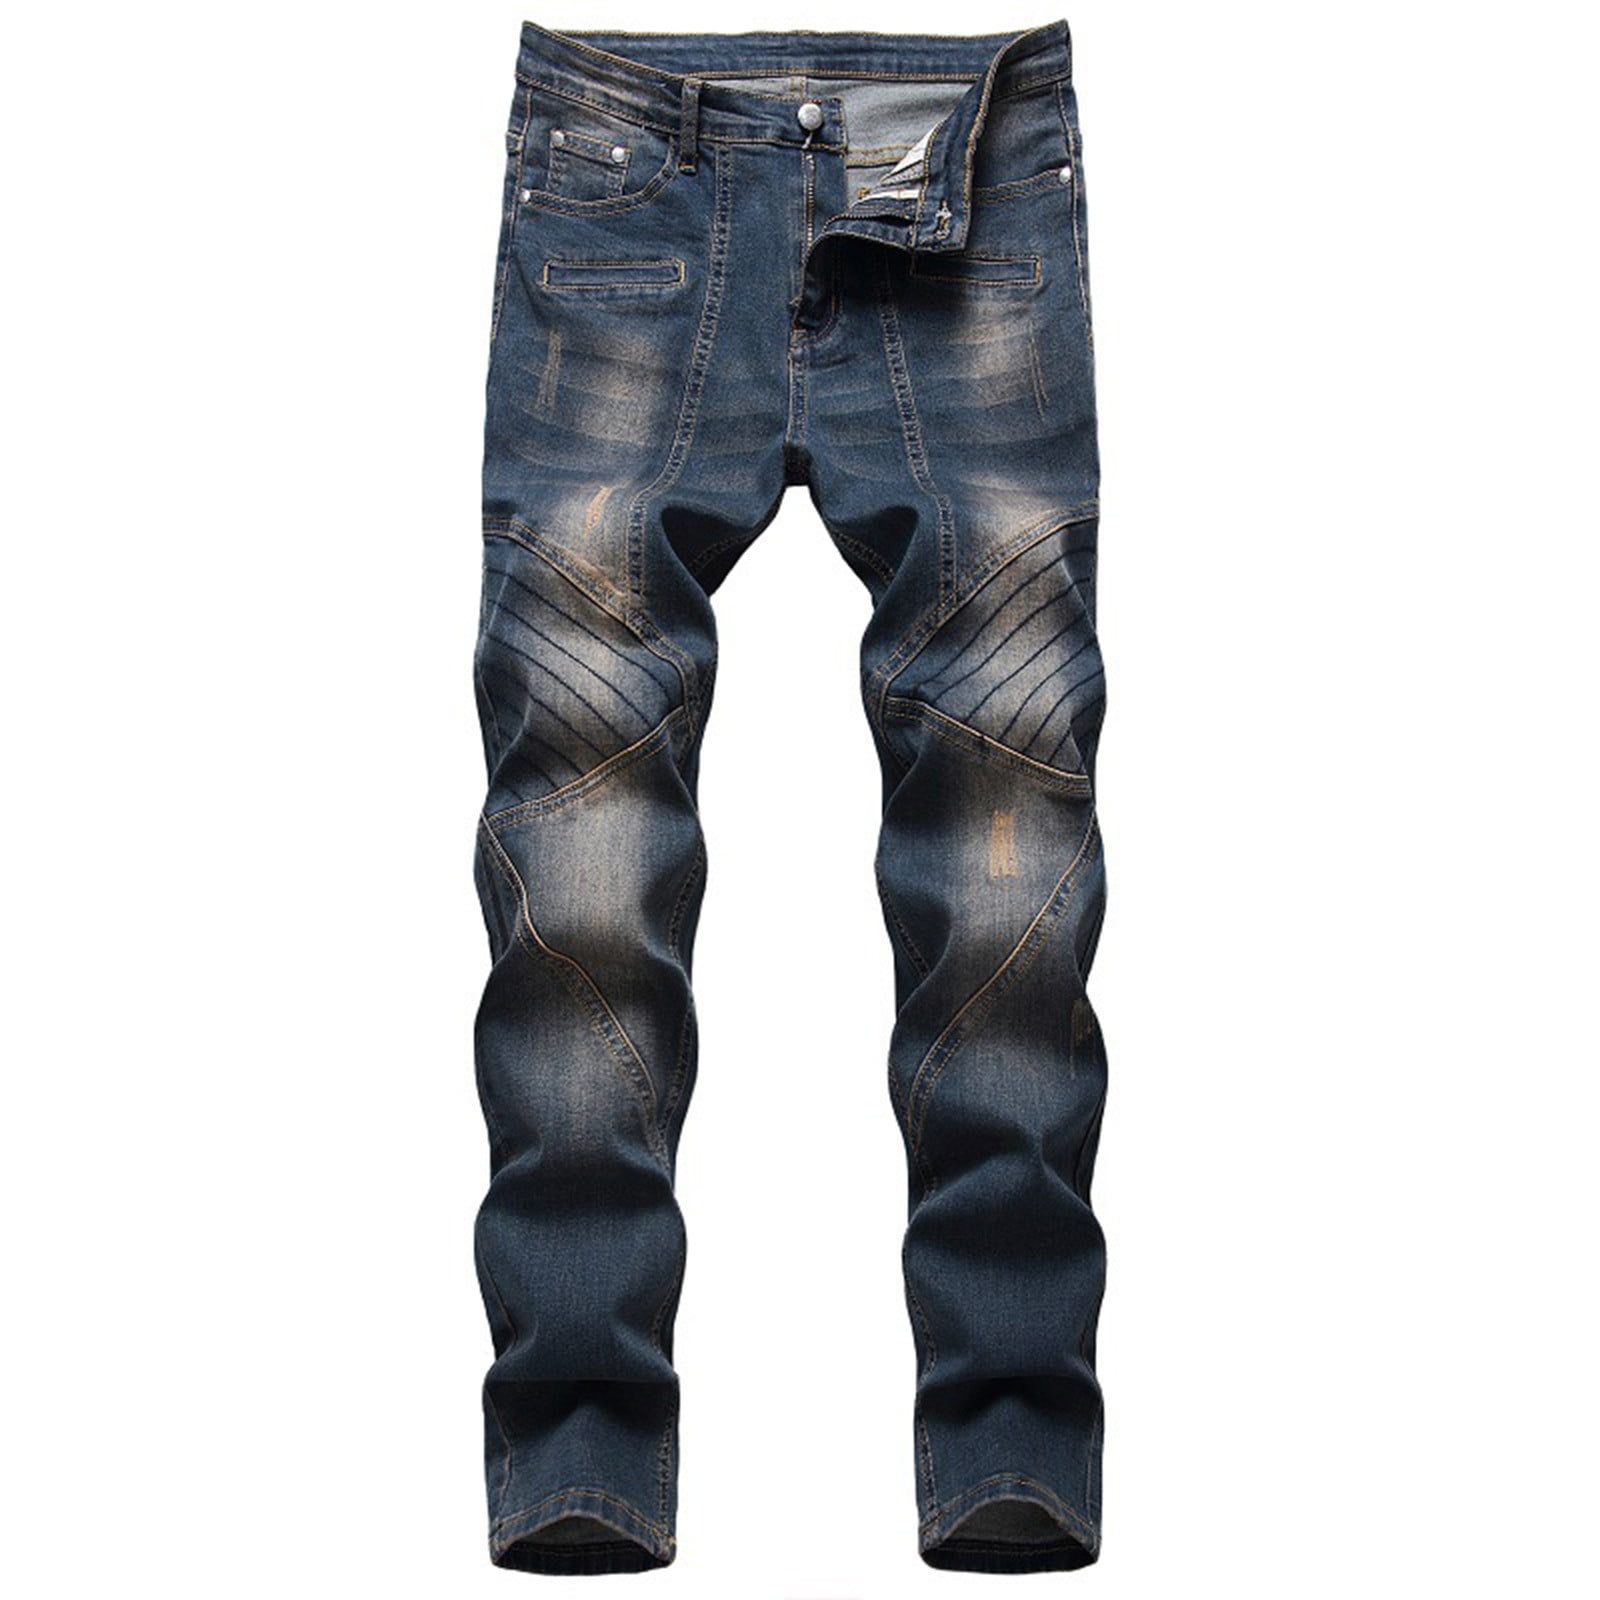 Aoochasliy Mens Jeans Clearance Reduced Price Men's High-end Stretch ...